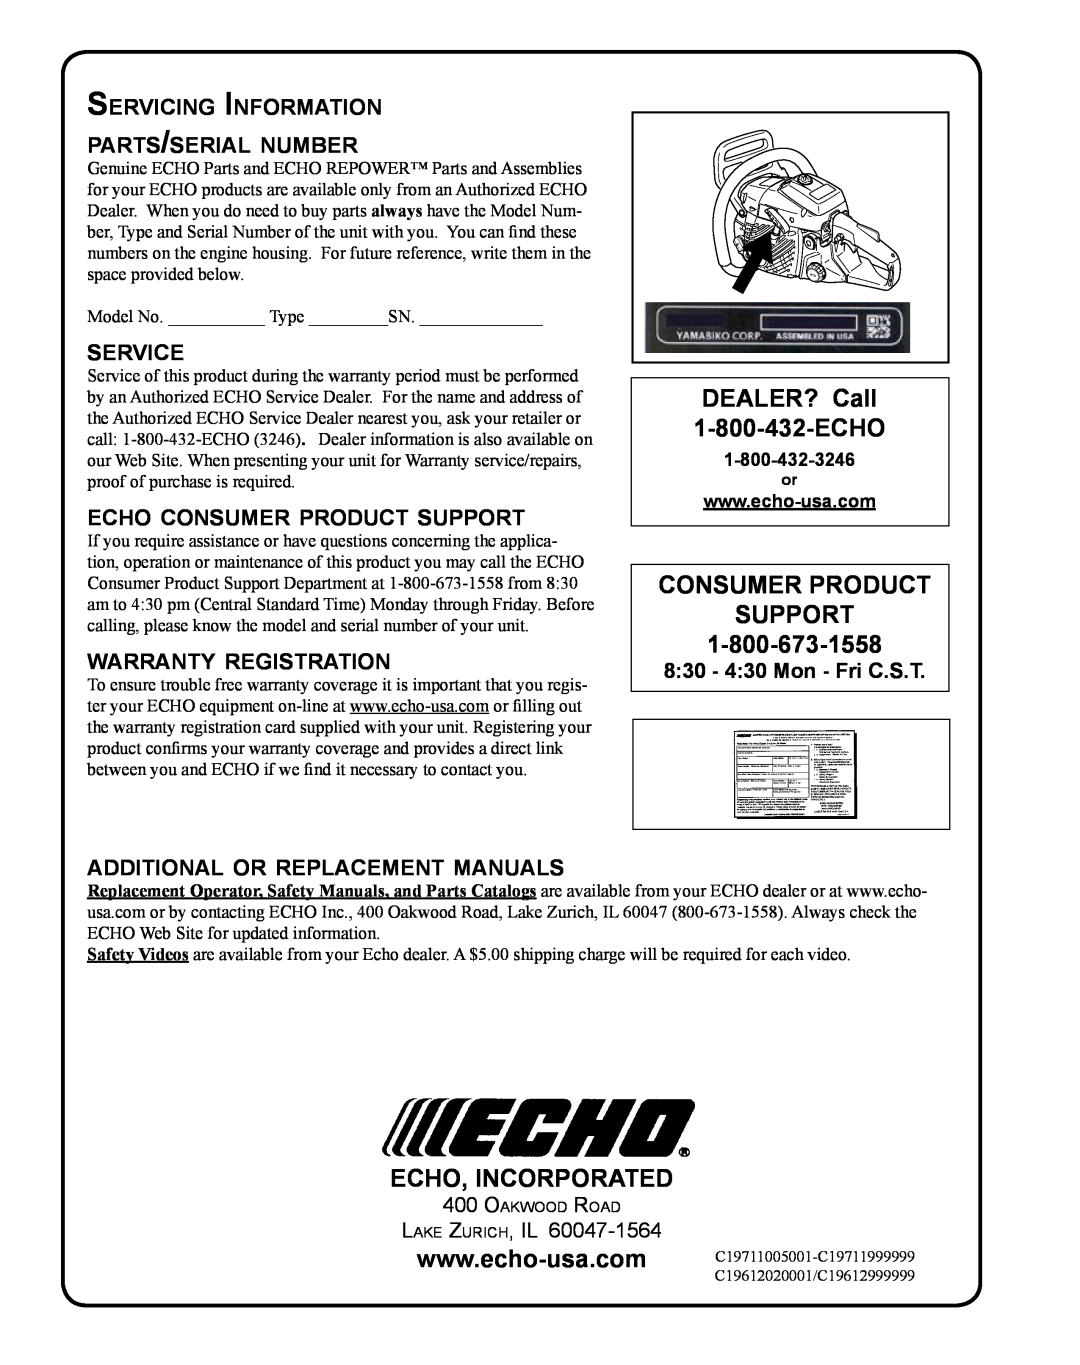 Echo X750020201 DEALER? Call 1-800-432-ECHO, Consumer Product Support, Echo, Incorporated, service, warranty registration 